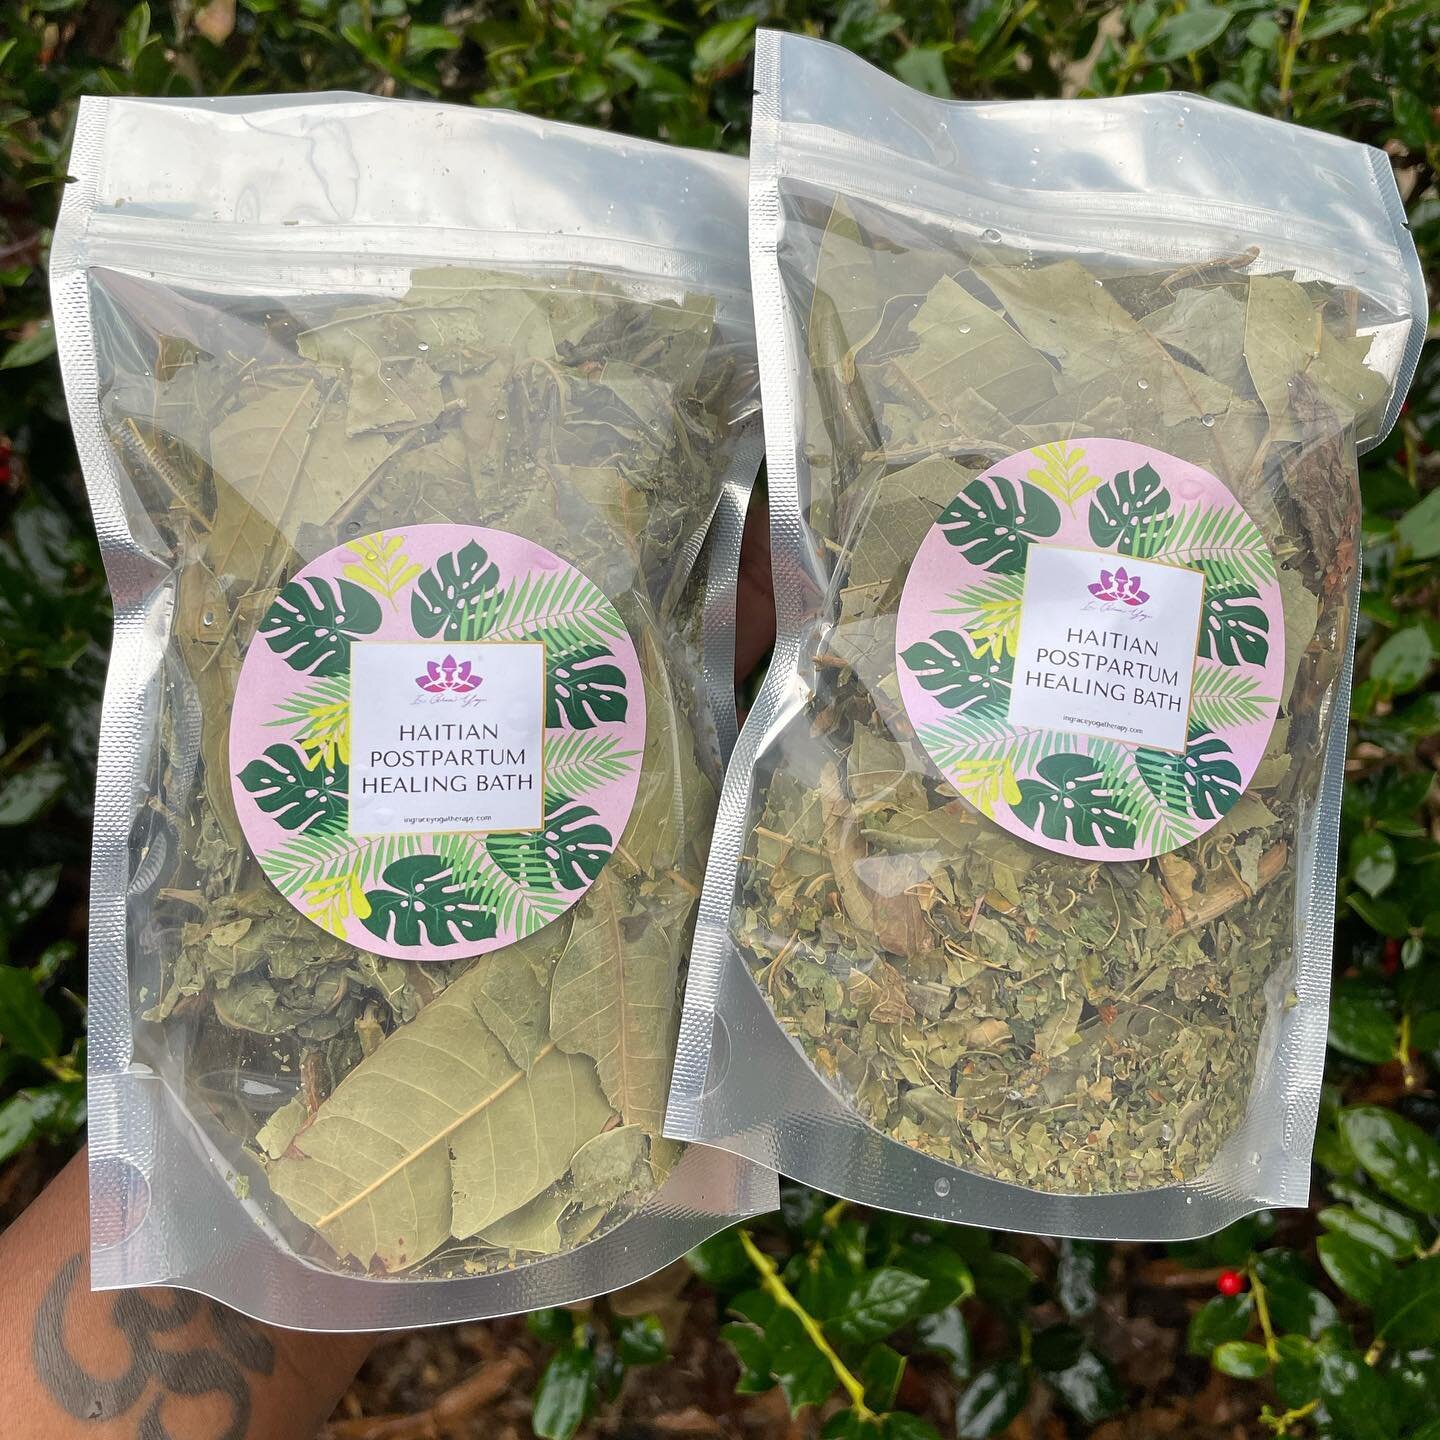 🌿 BIRTHING HERBS 🪴 THANK YOU FOR YOUR ORDERS 🌿 it&rsquo;s Fridayyy and some mamas have personally DM&rsquo;ed me to share the news of upcoming births. All herbs have been shipped! 
__
Incorporate Haitian Tradition and culture as part of your postp